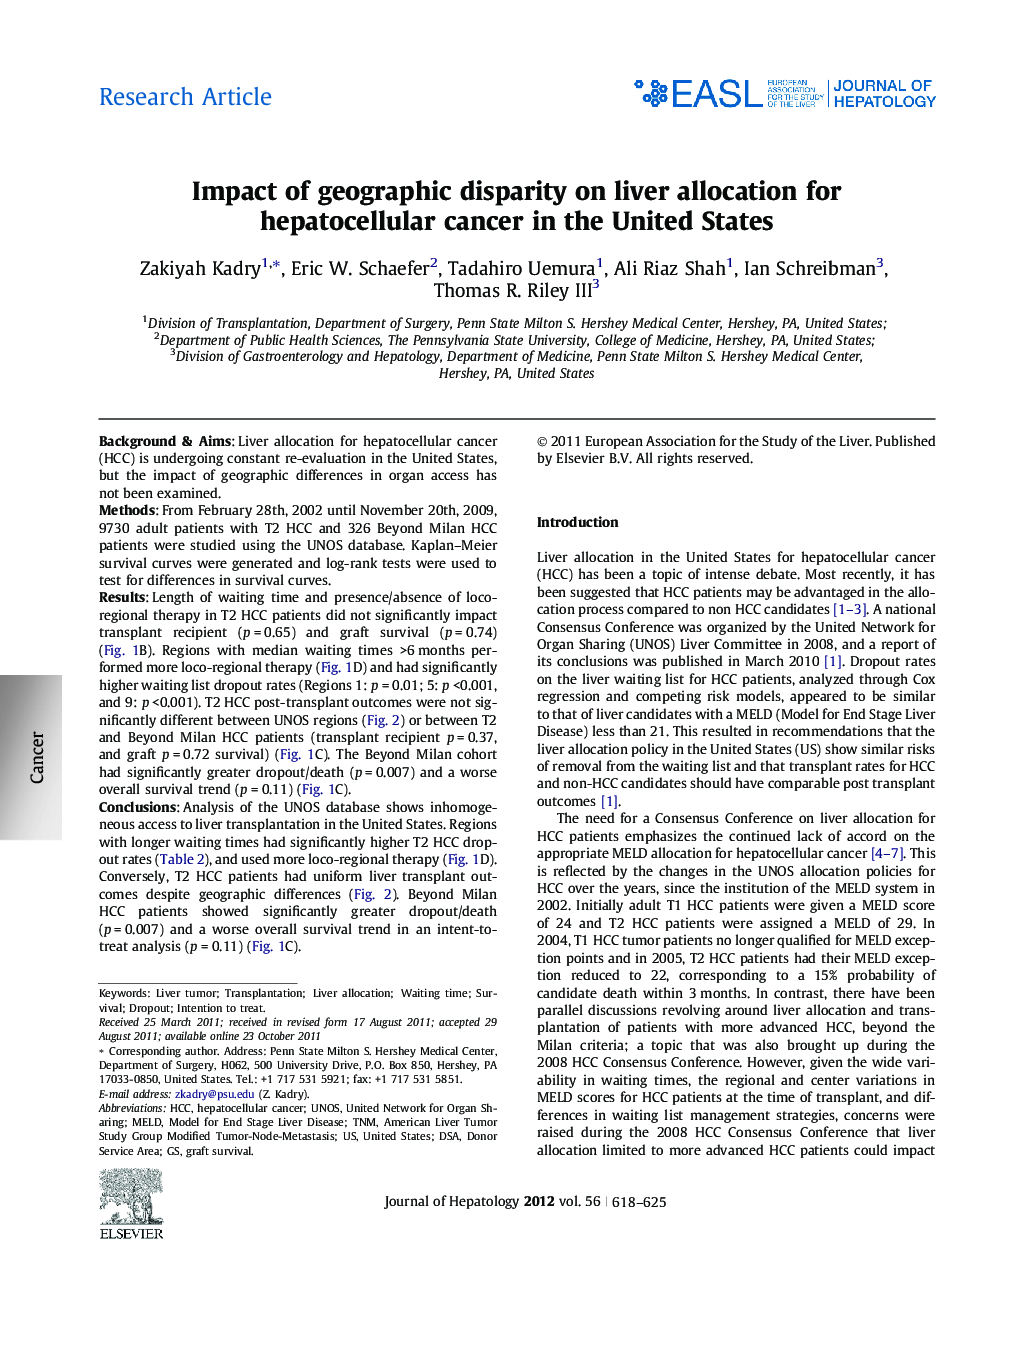 Research ArticleImpact of geographic disparity on liver allocation for hepatocellular cancer in the United States